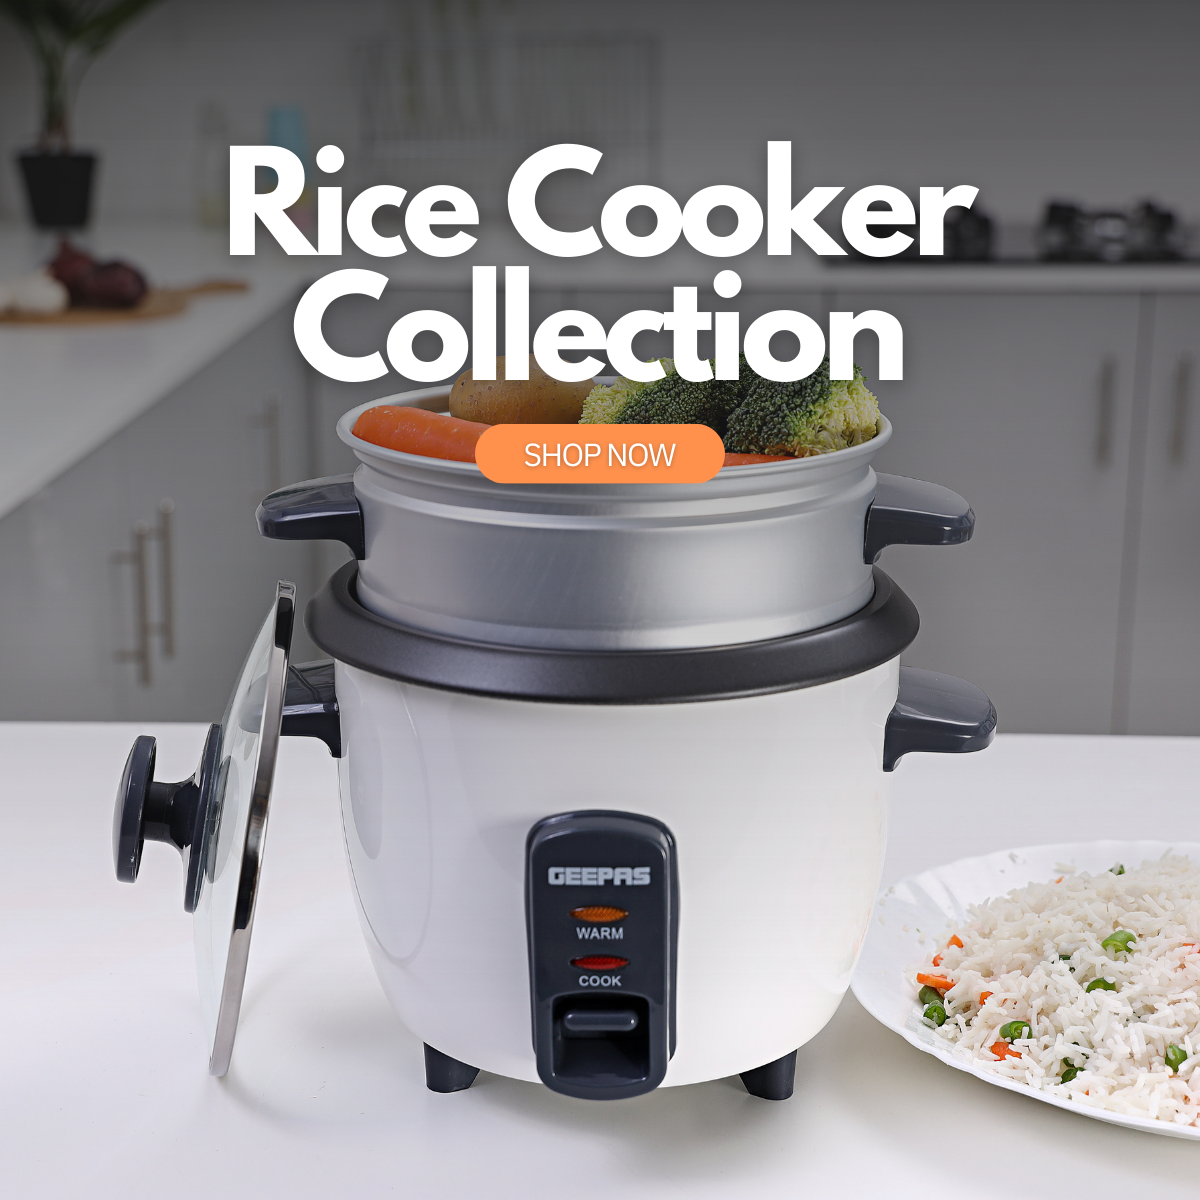 A large model of the rice cooker on top of a kitchen countertop with veg inside ready for steaming and a large plate of rice besides it.